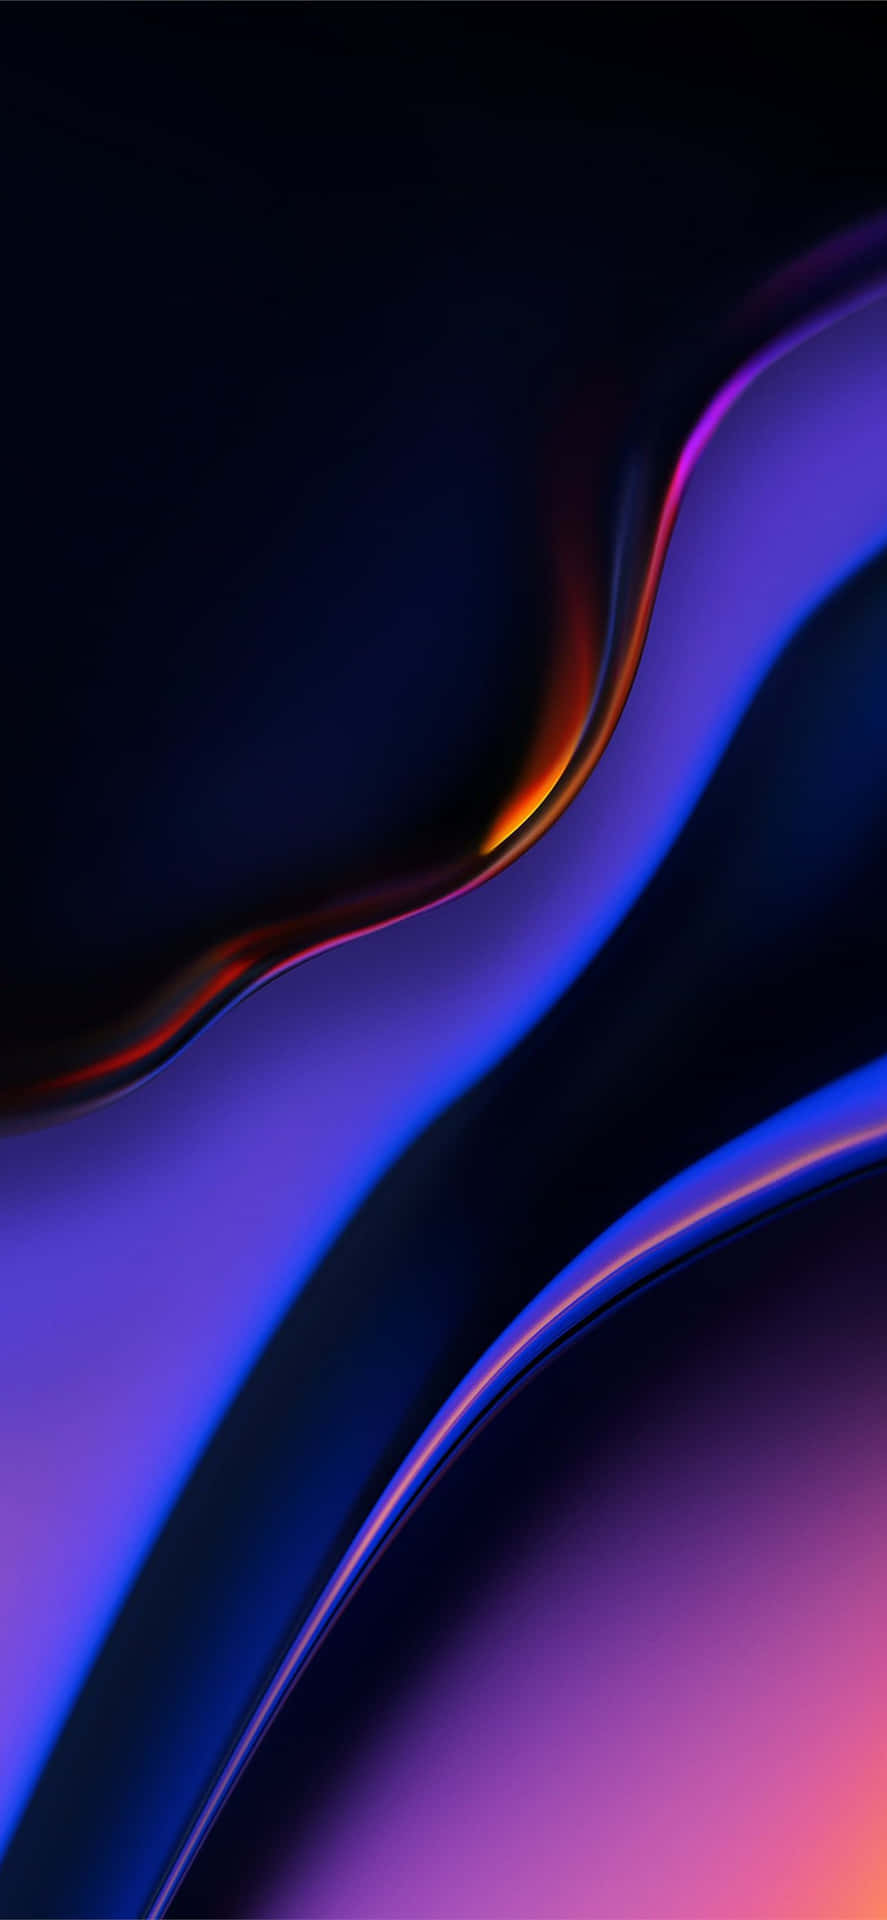 100+] Samsung Galaxy A20 Wallpapers | Wallpapers.com